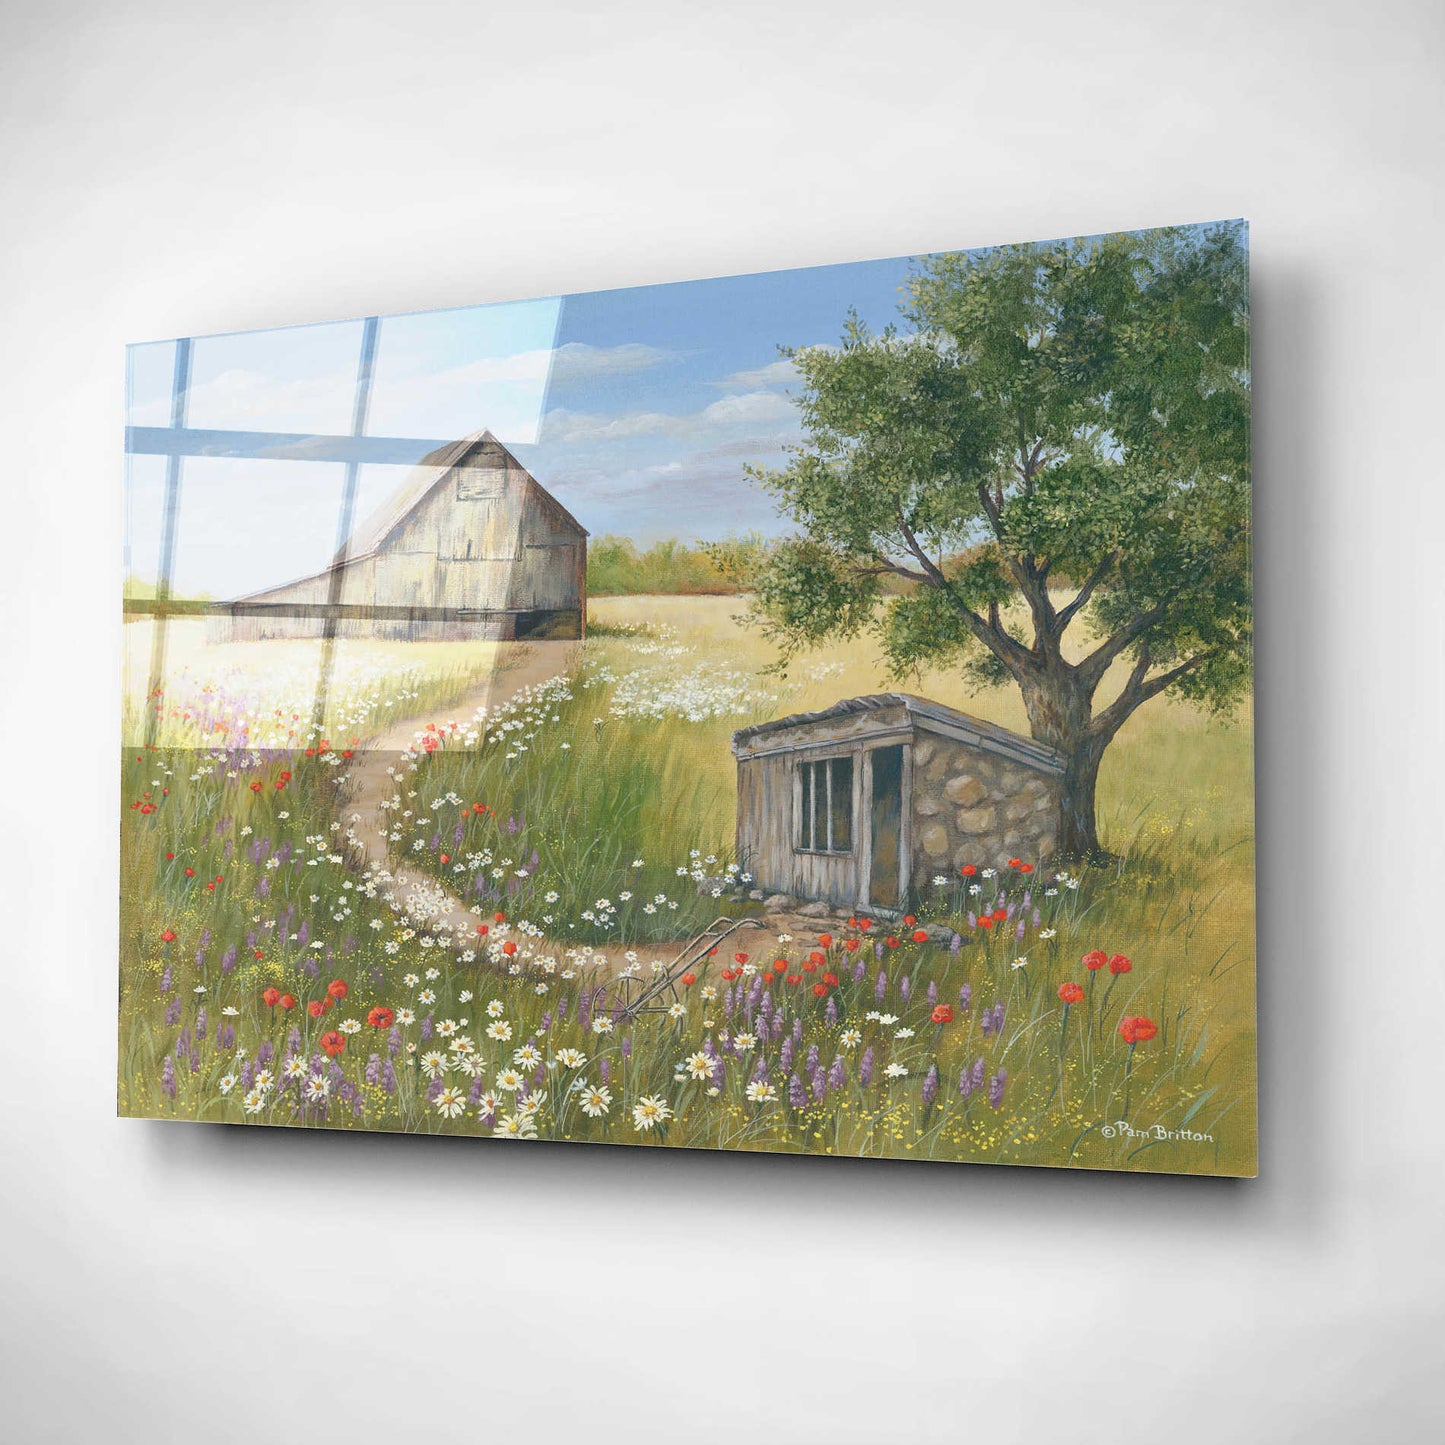 Epic Art 'Country Wildflowers II' by Pam Britton, Acrylic Glass Wall Art,24x16